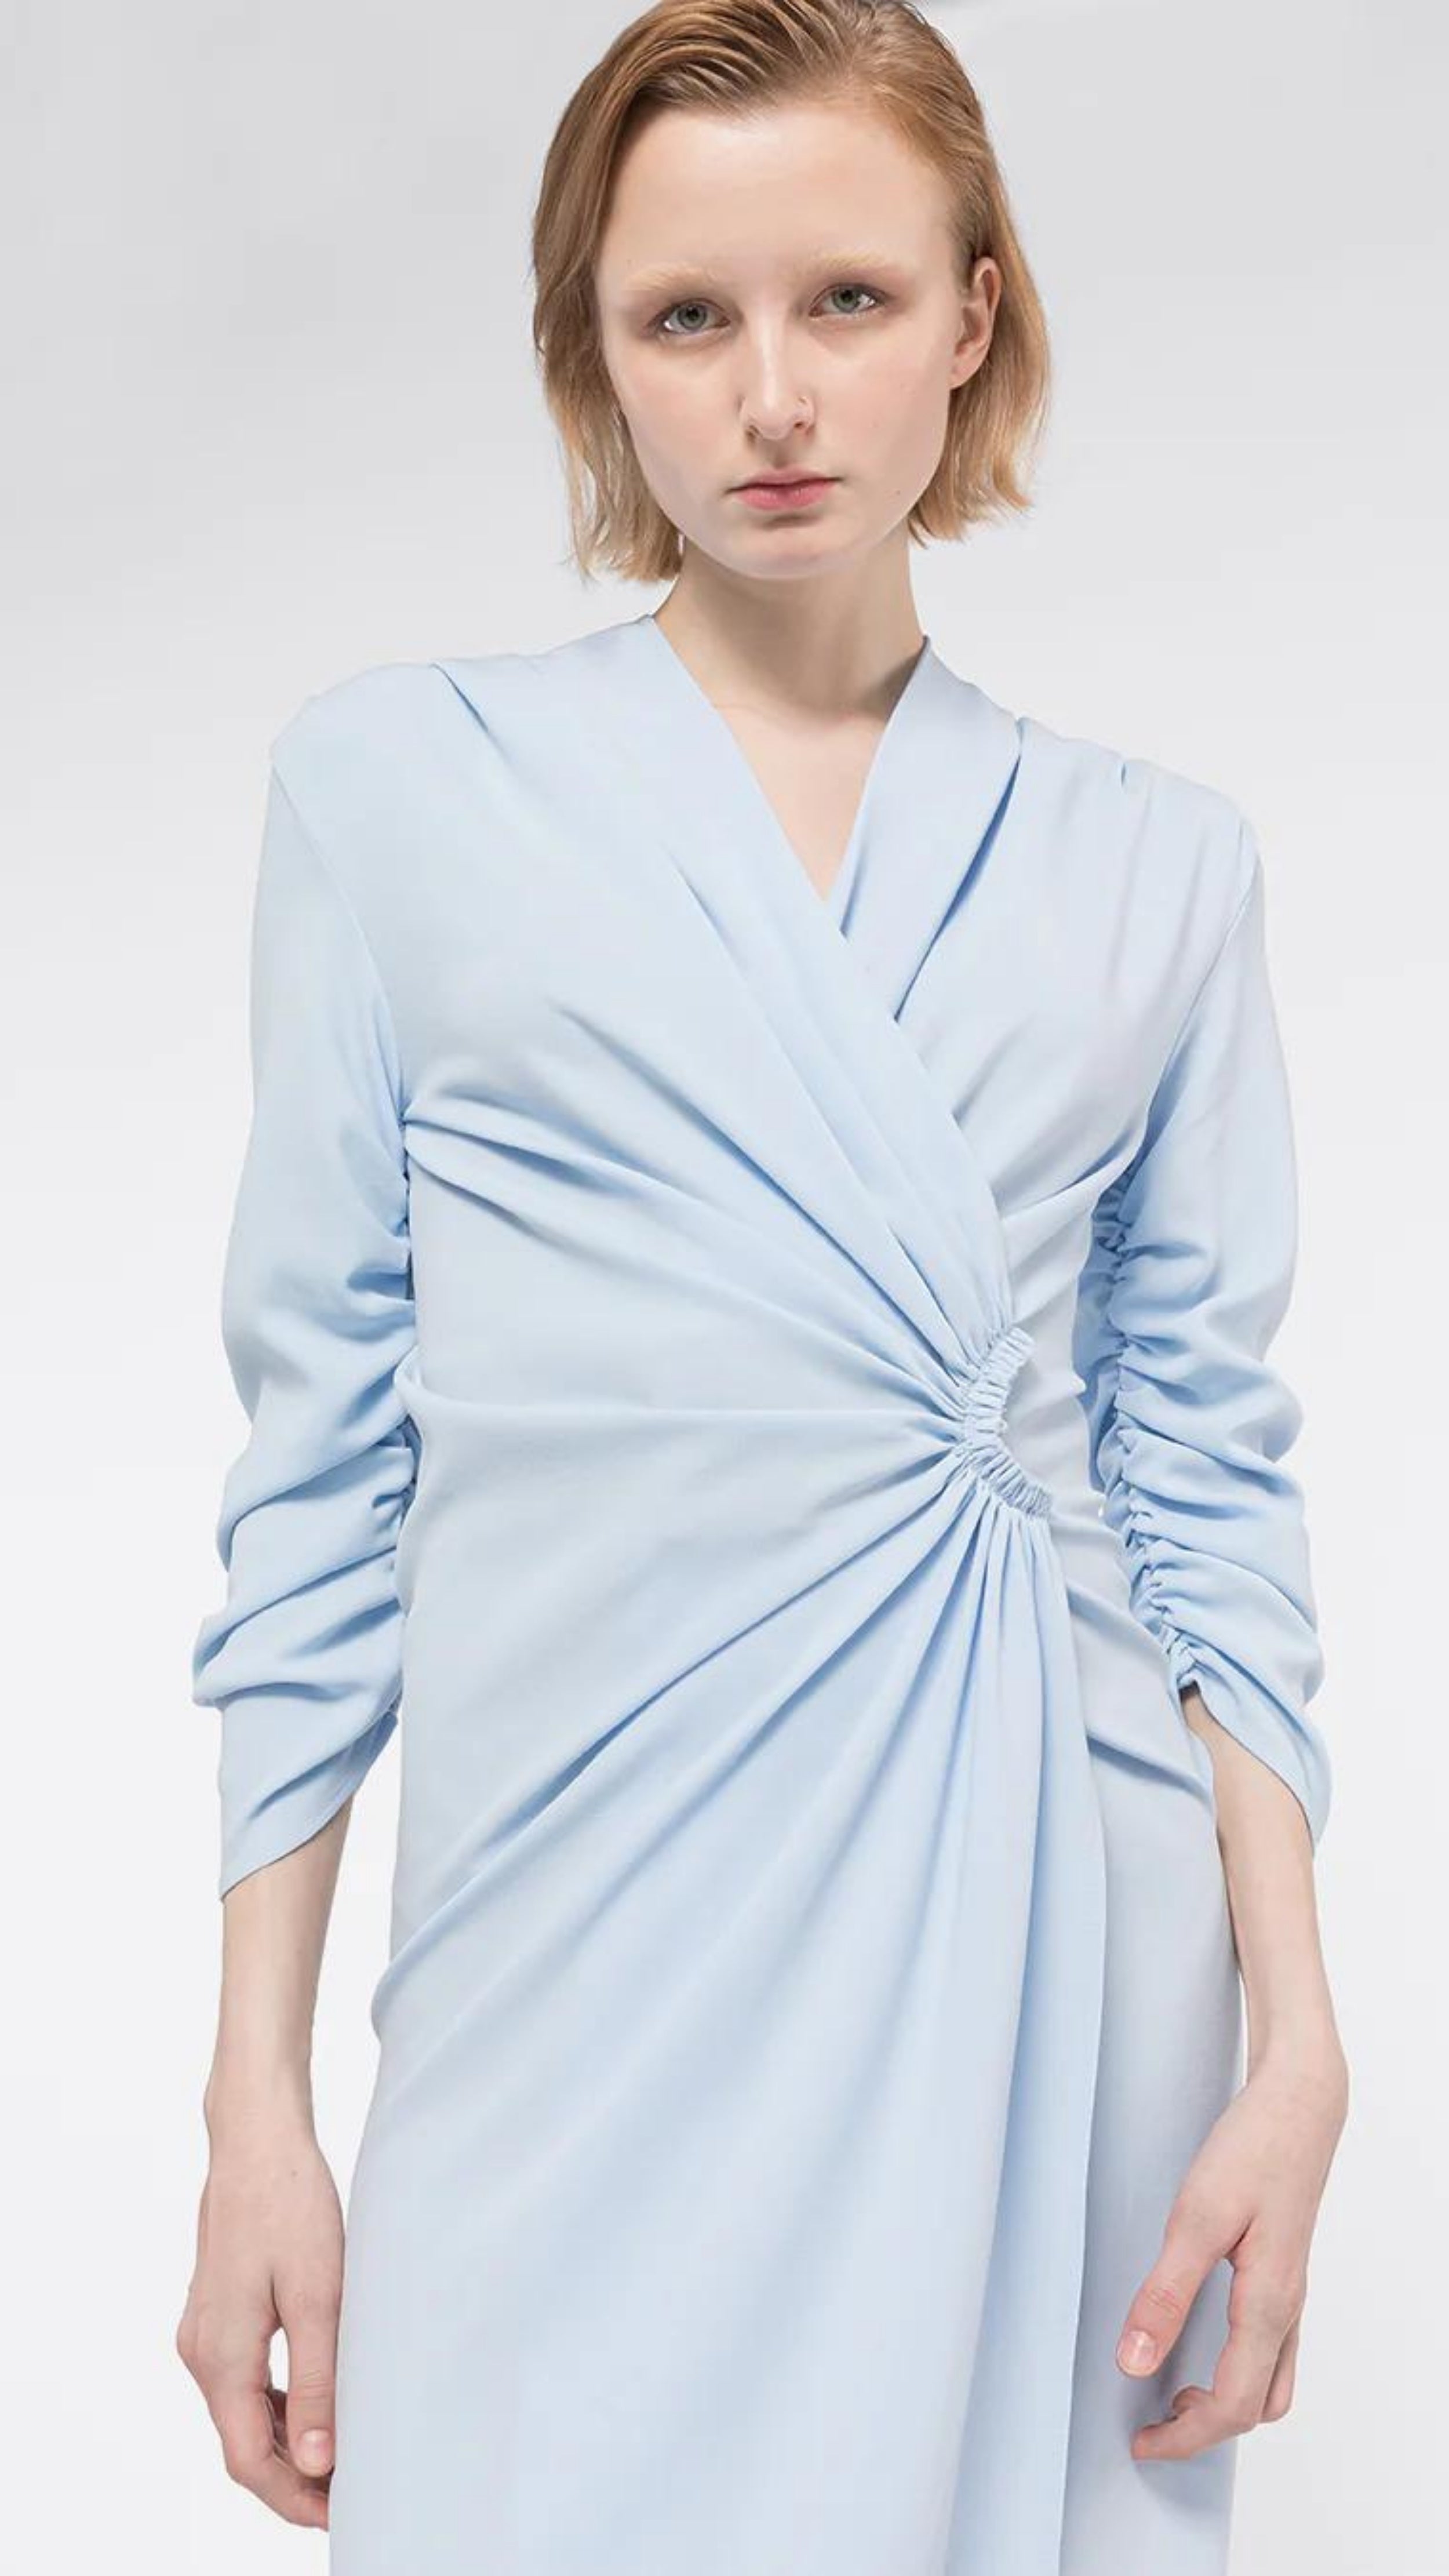 AZ Factory Lutz Huelle, Ella Dress. Crafted with a crepe texture in sky blue hue. V neck and draped, off center gathered front. Half length ruched sleeves  with a midi length skirt. Shown on model facing front, detail.